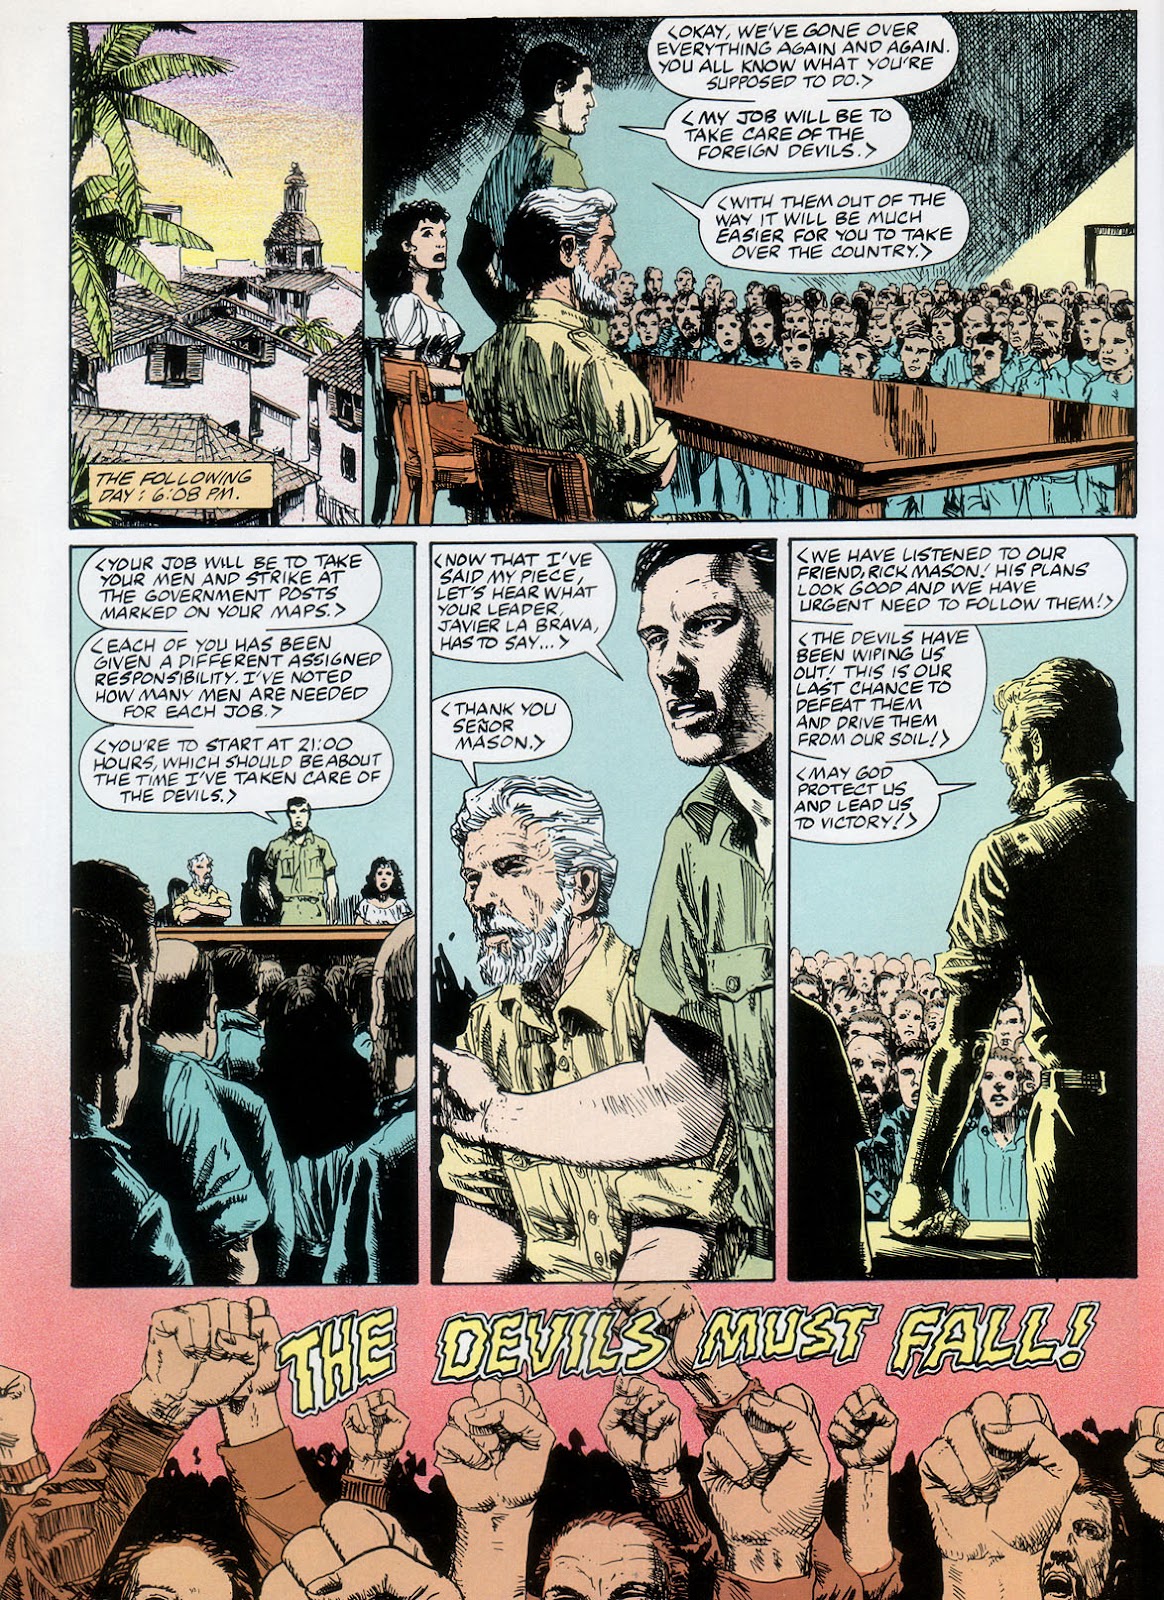 Marvel Graphic Novel issue 57 - Rick Mason - The Agent - Page 68